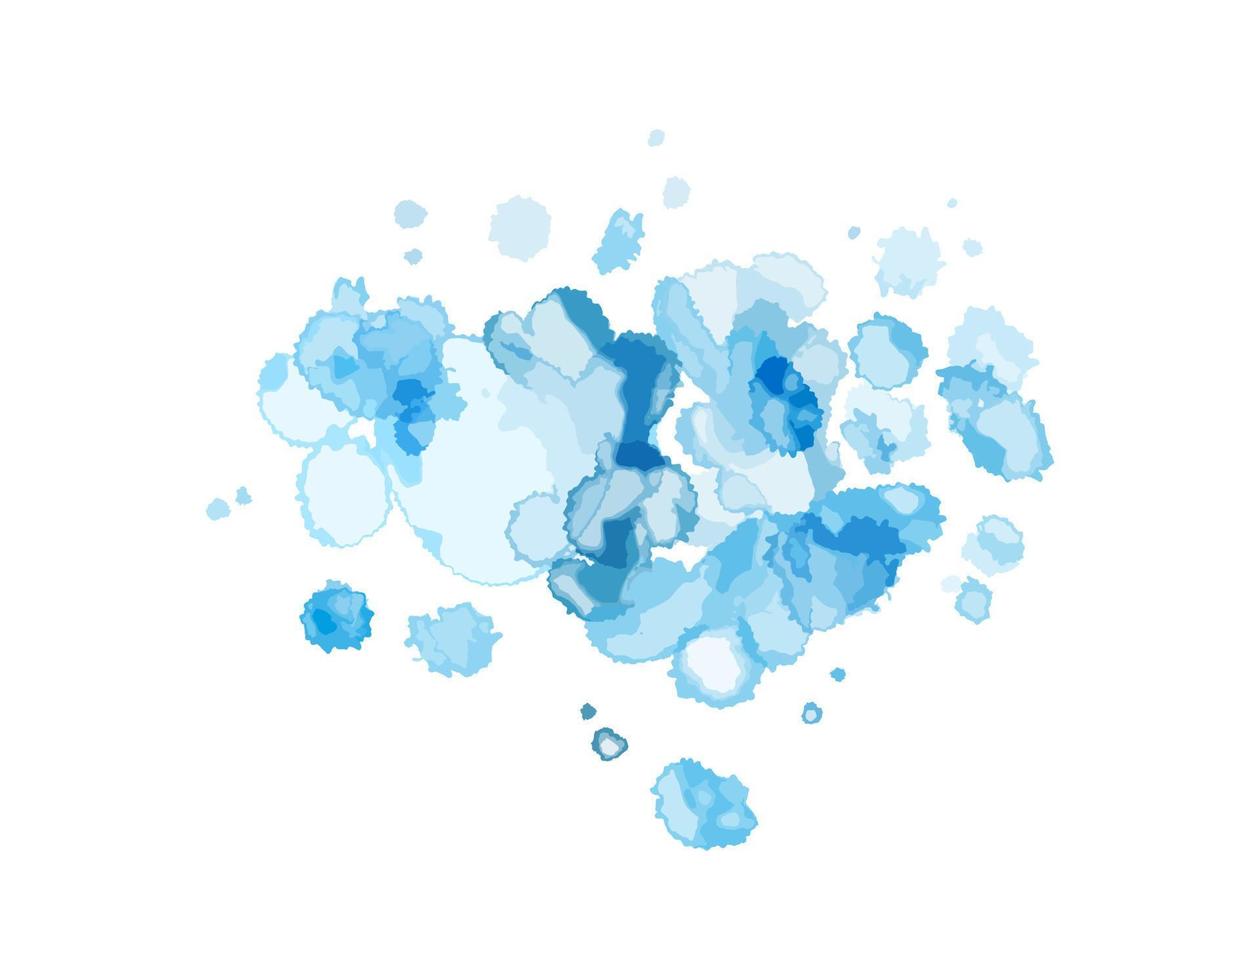 Abstract blue watercolor splash texture isolated on white background. Grunge textured paint, vector watercolor artistic circle shape spot.